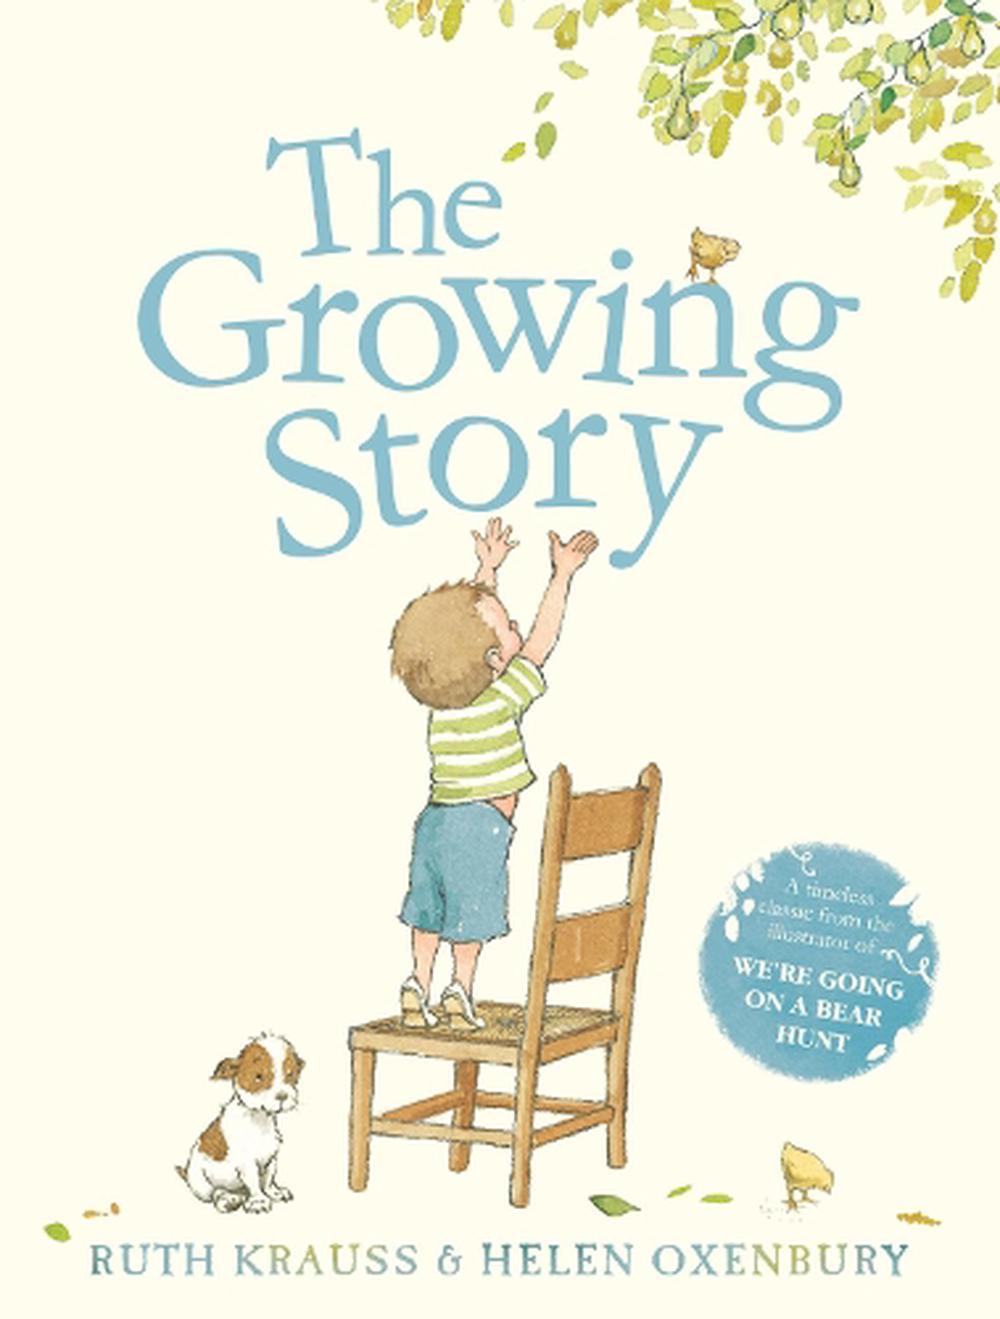 Grow stories. Growing stories. Little imperfections story of growing up different book.